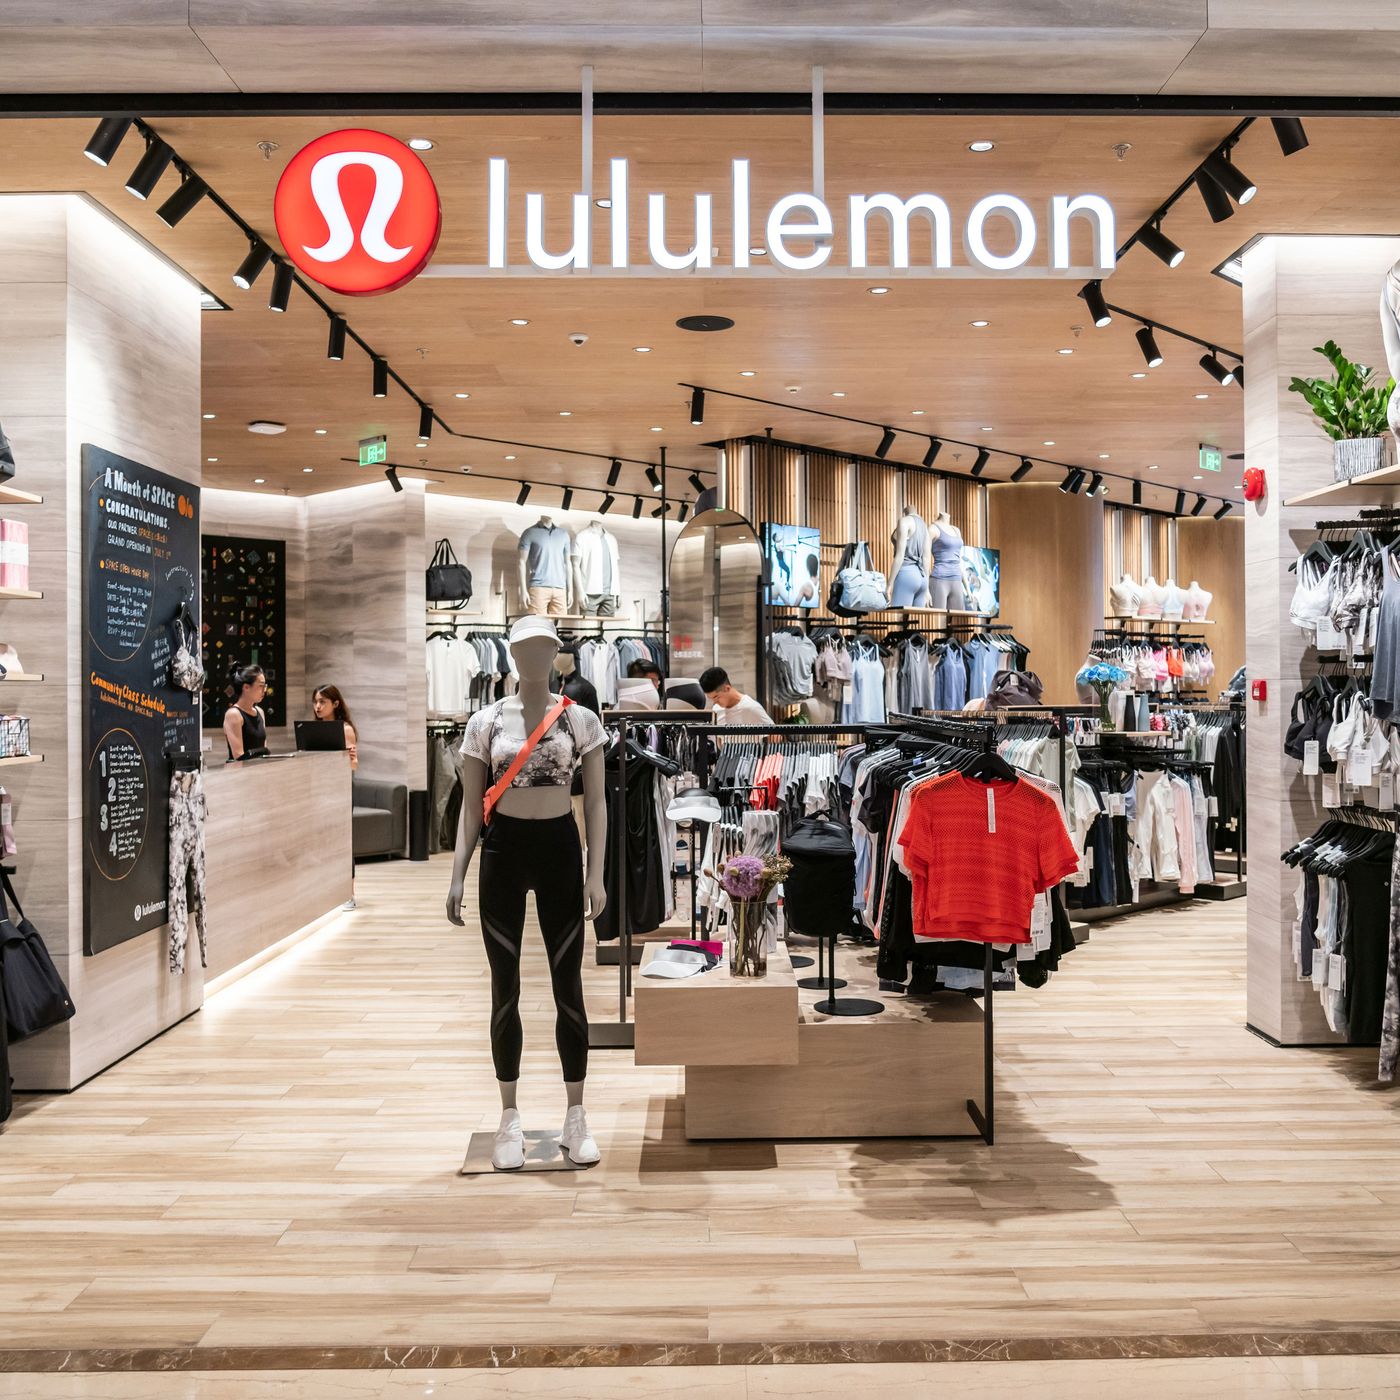 Lululemon Founder's Controversial Diversity Statements